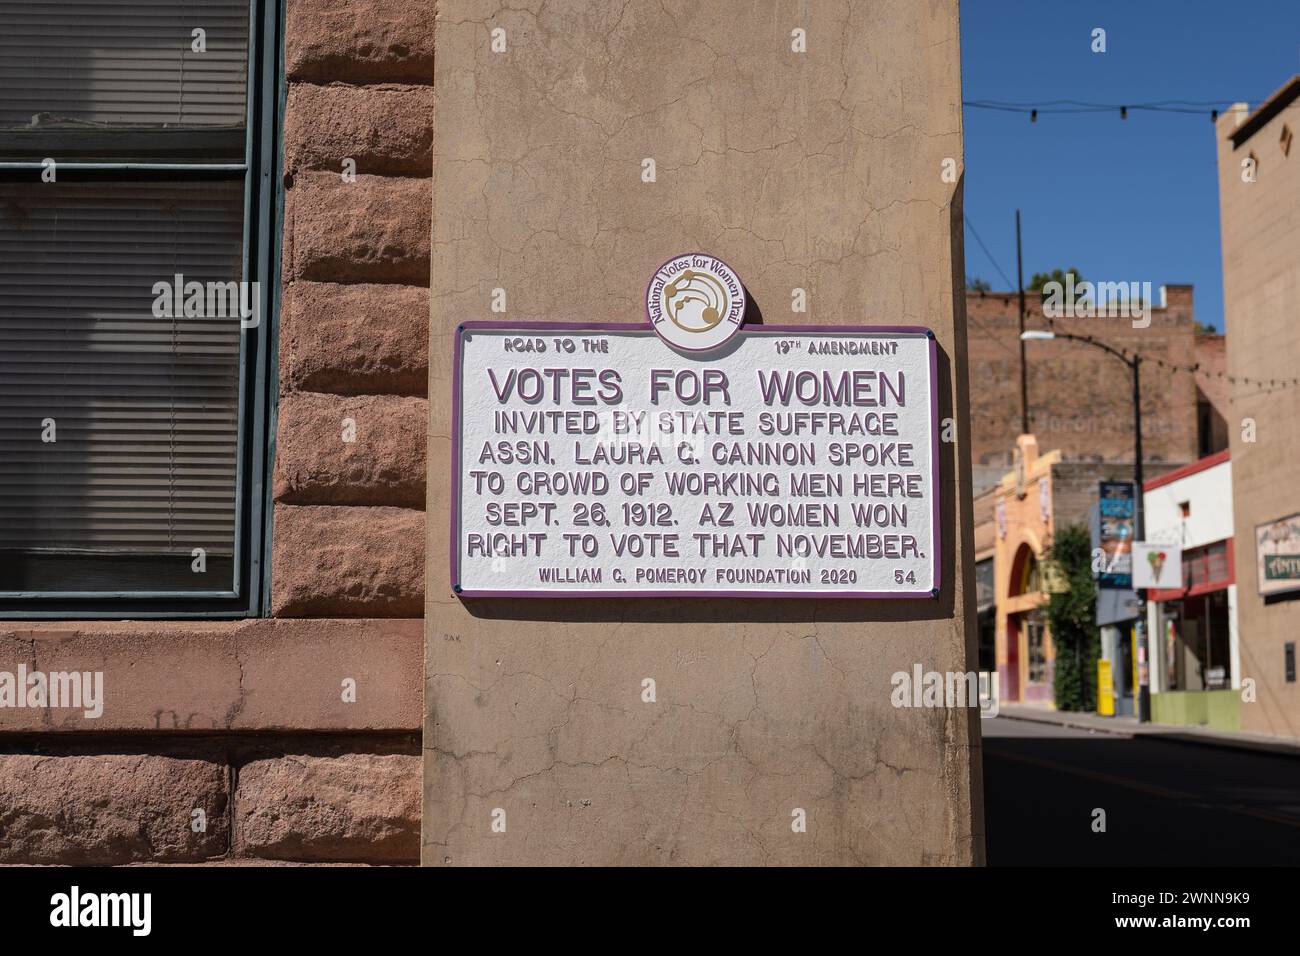 Bisbee, AZ - Oct. 10, 2021: Laura Gregg Cannon, an American lecturer and organizer in the women's suffrage movement, spoke to a crowd of working men h Stock Photo